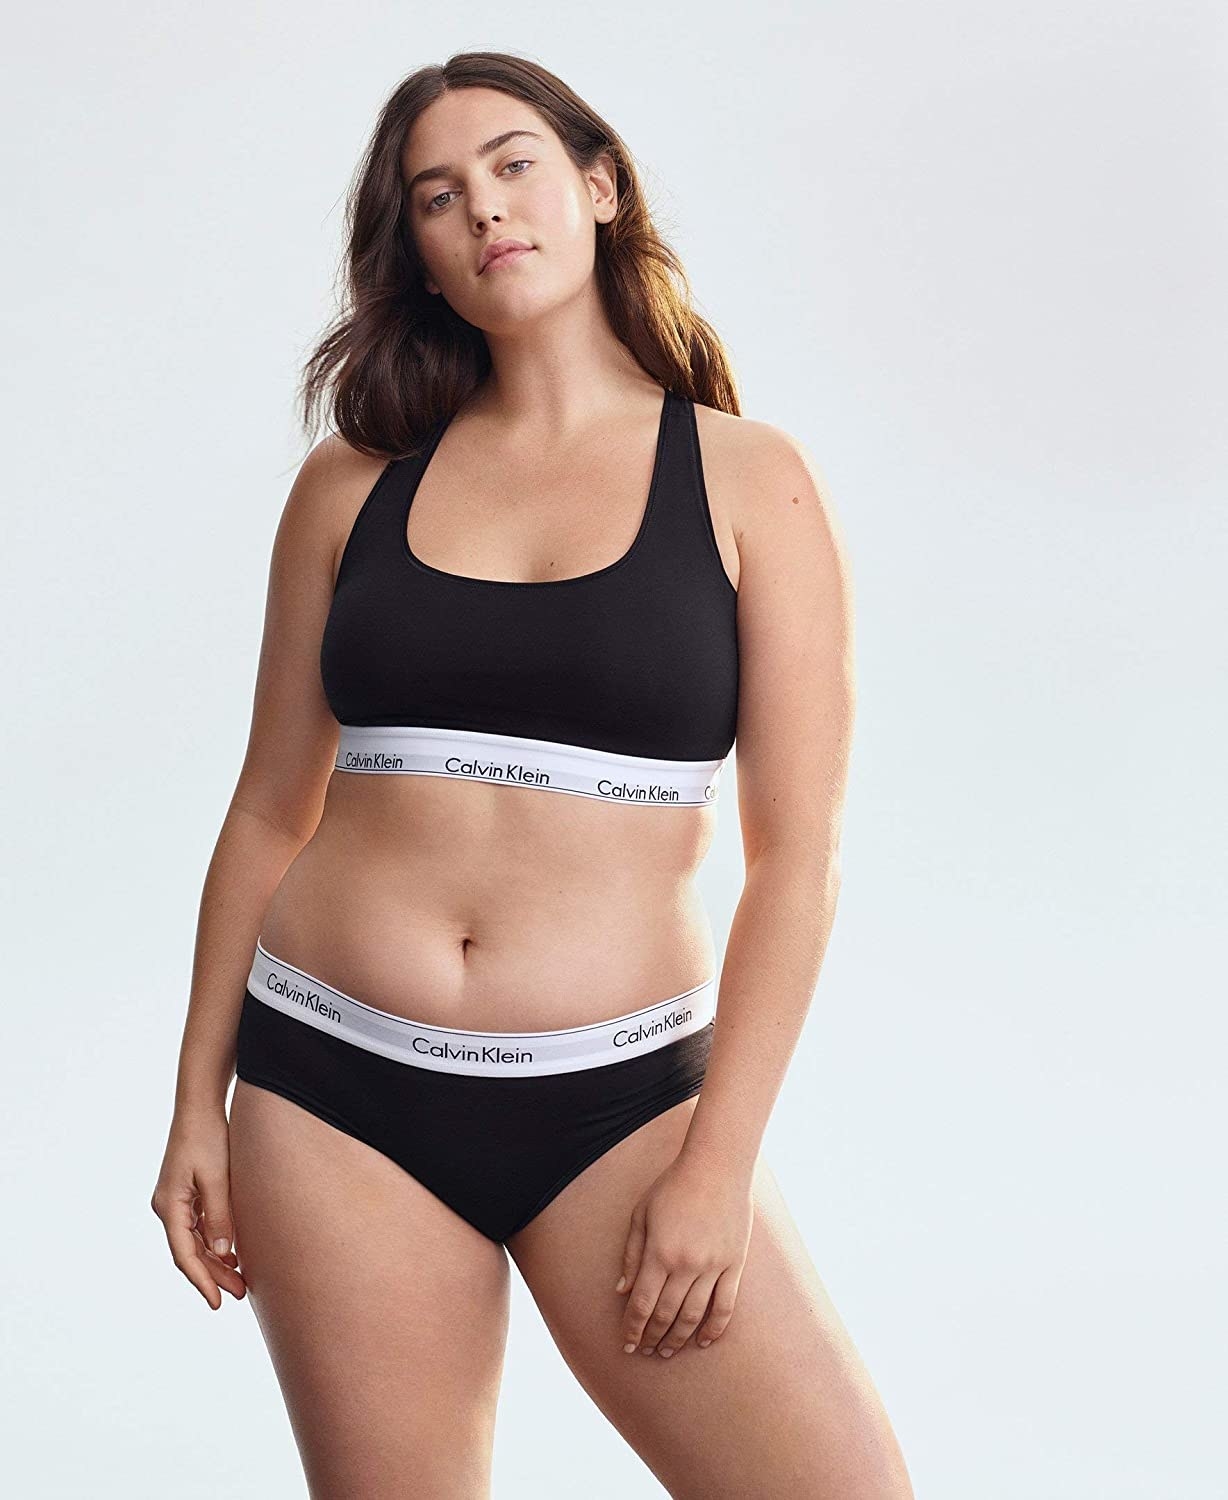 model wearing black bralette with white logo band and matching underwear